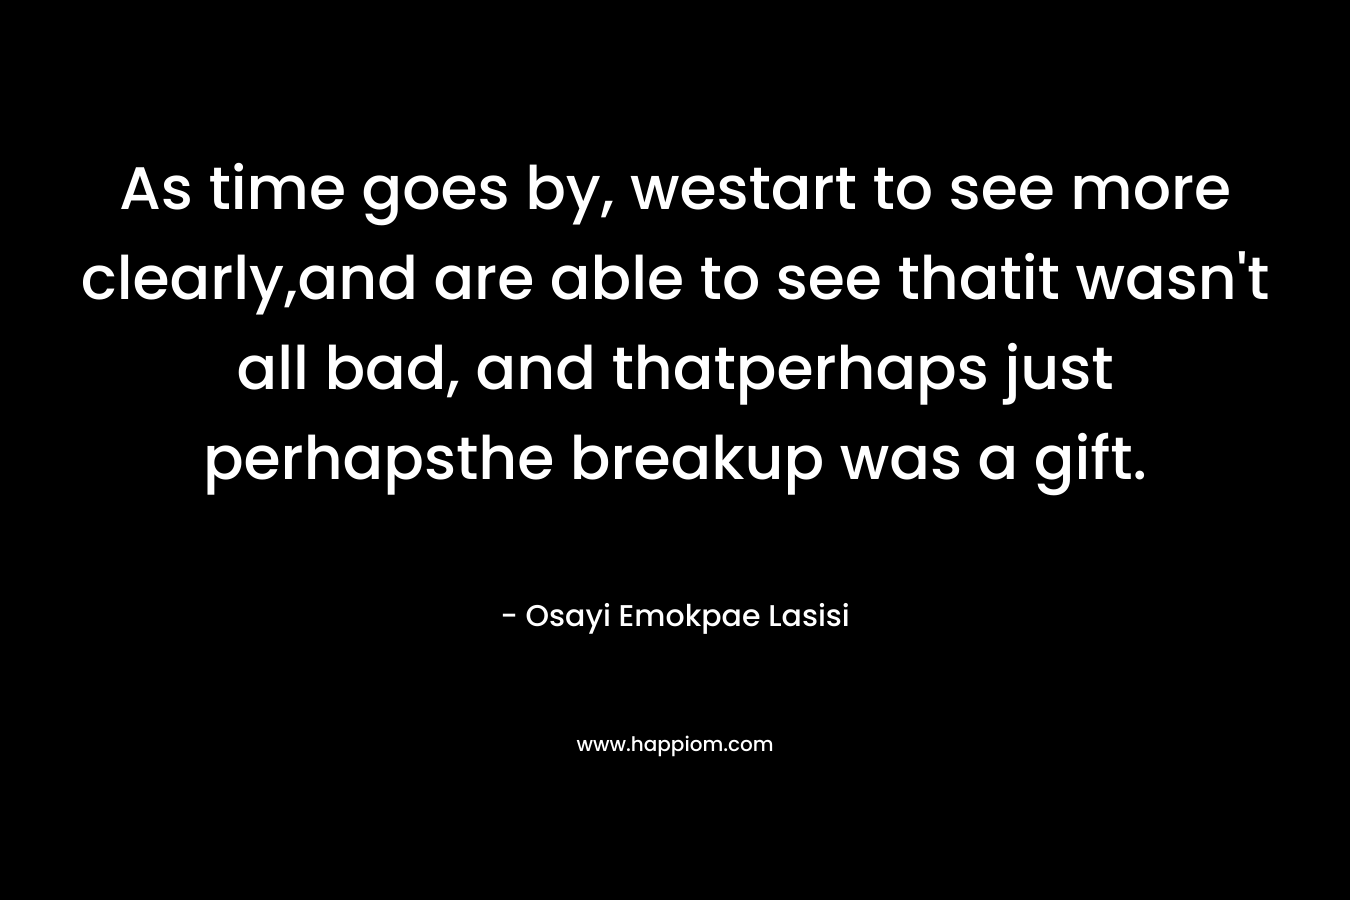 As time goes by, westart to see more clearly,and are able to see thatit wasn’t all bad, and thatperhaps just perhapsthe breakup was a gift. – Osayi Emokpae Lasisi